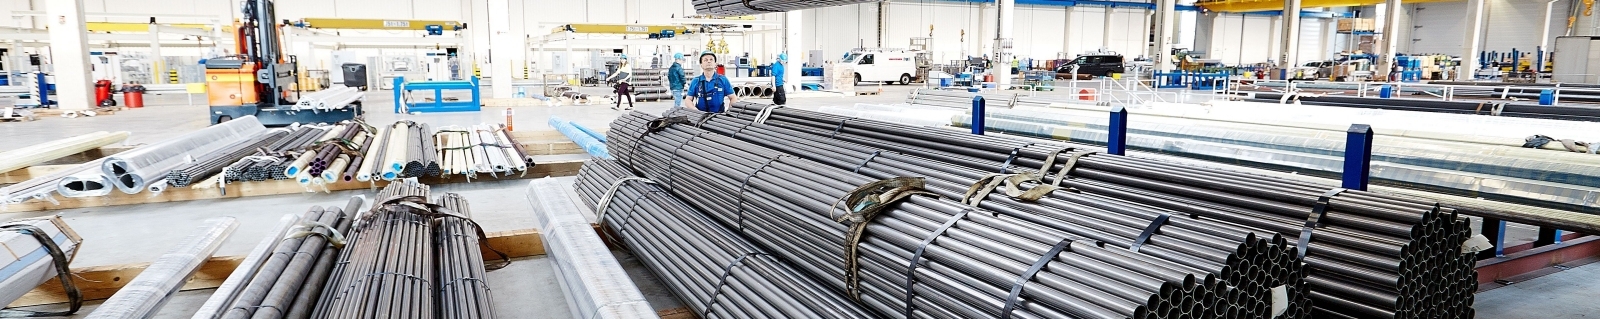 Van Leeuwen Pipe and Tube Group achieves positive result in 2020